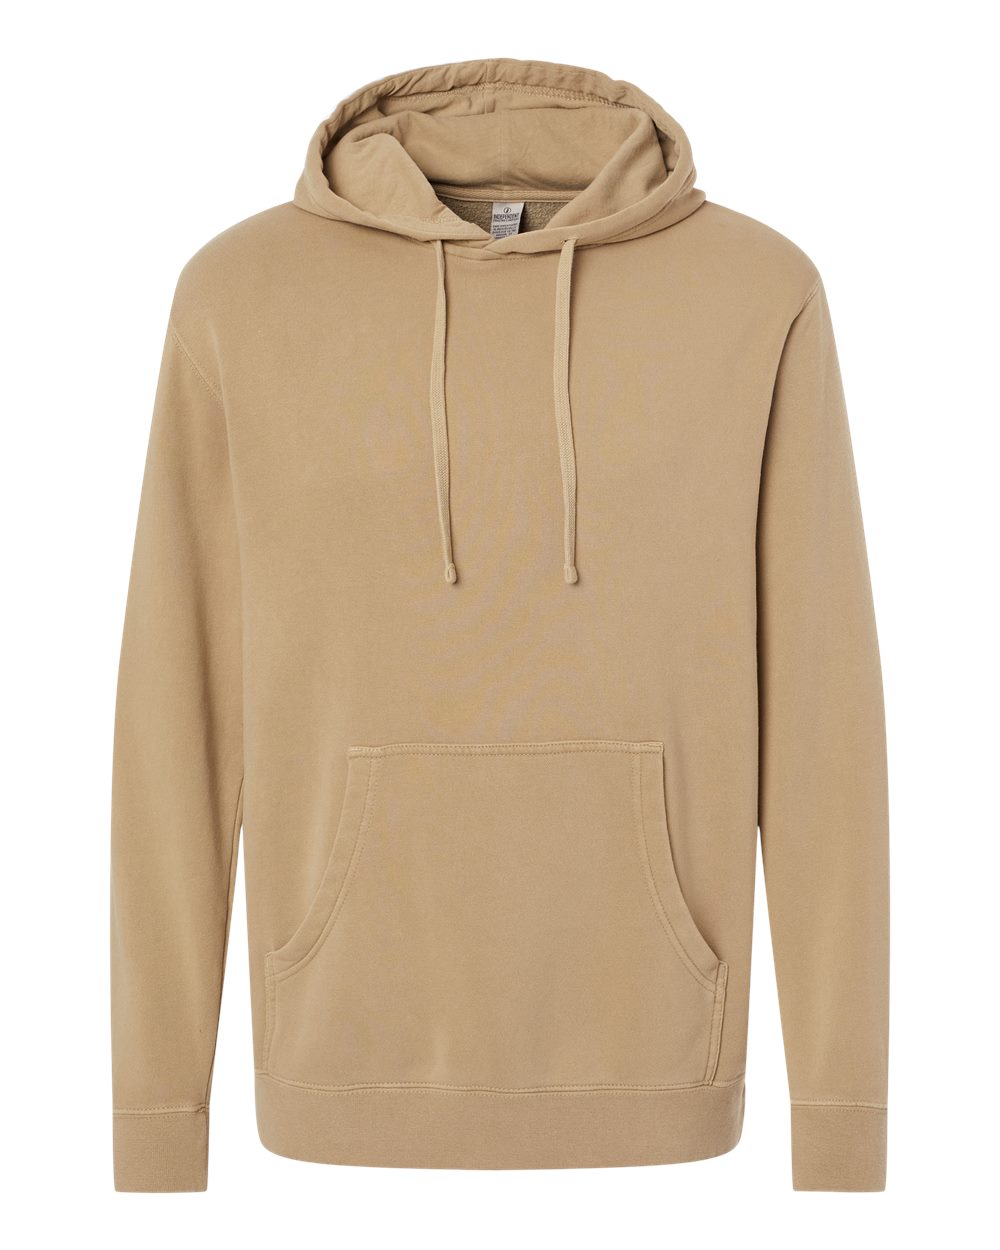 Independent Trading Co® Midweight Pigment-Dyed Hooded Sweatshirt